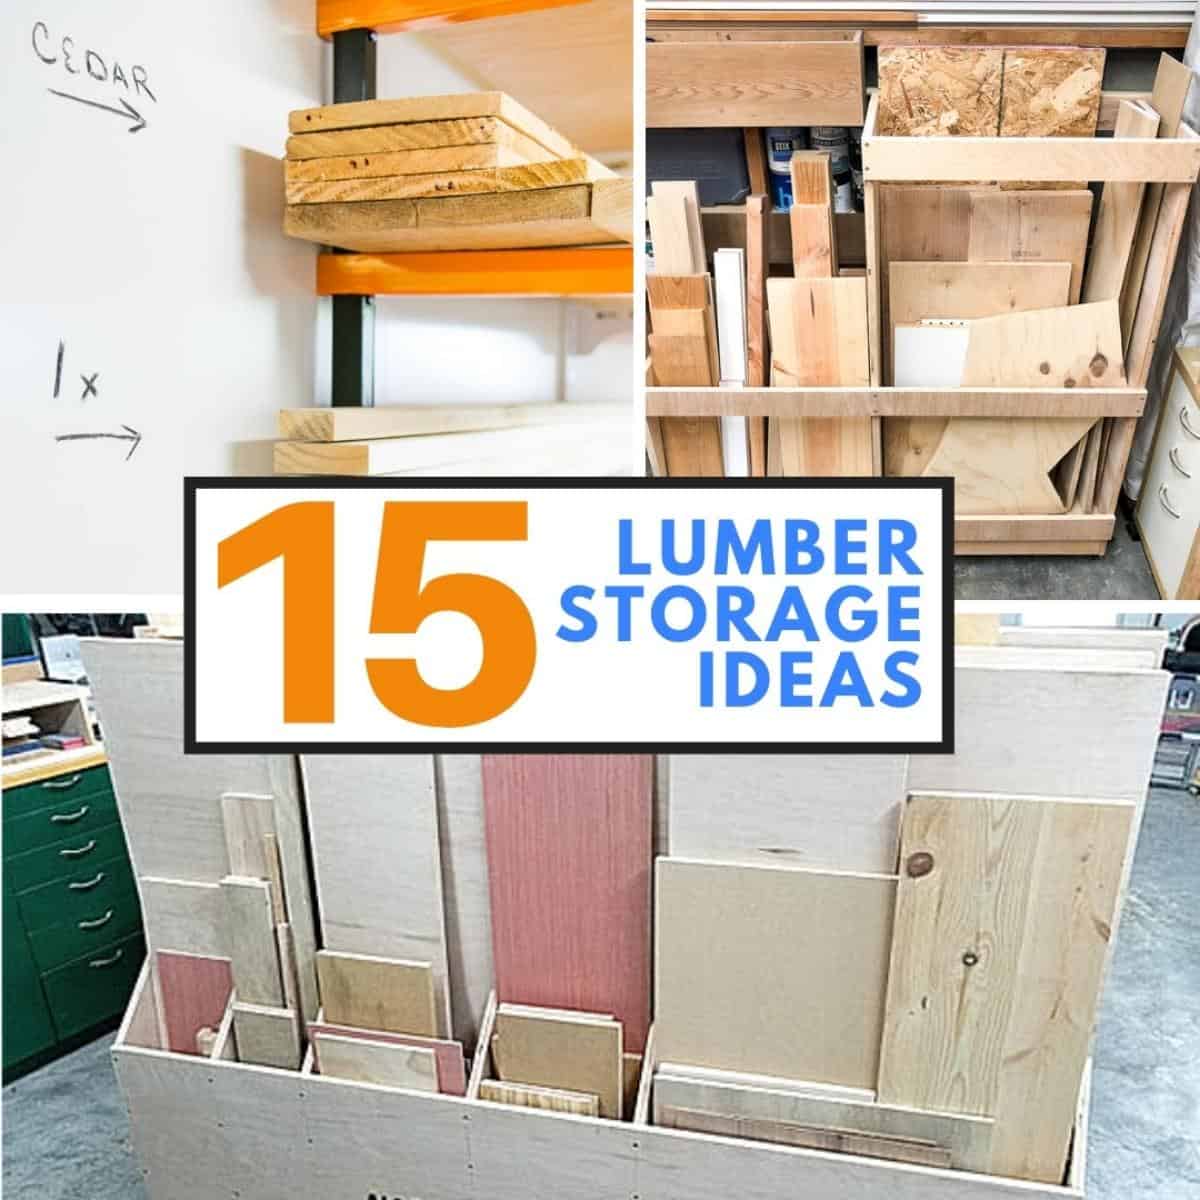 https://www.thehandymansdaughter.com/wp-content/uploads/2020/06/lumber-and-scrap-wood-storage-ideas-featured-image.jpeg